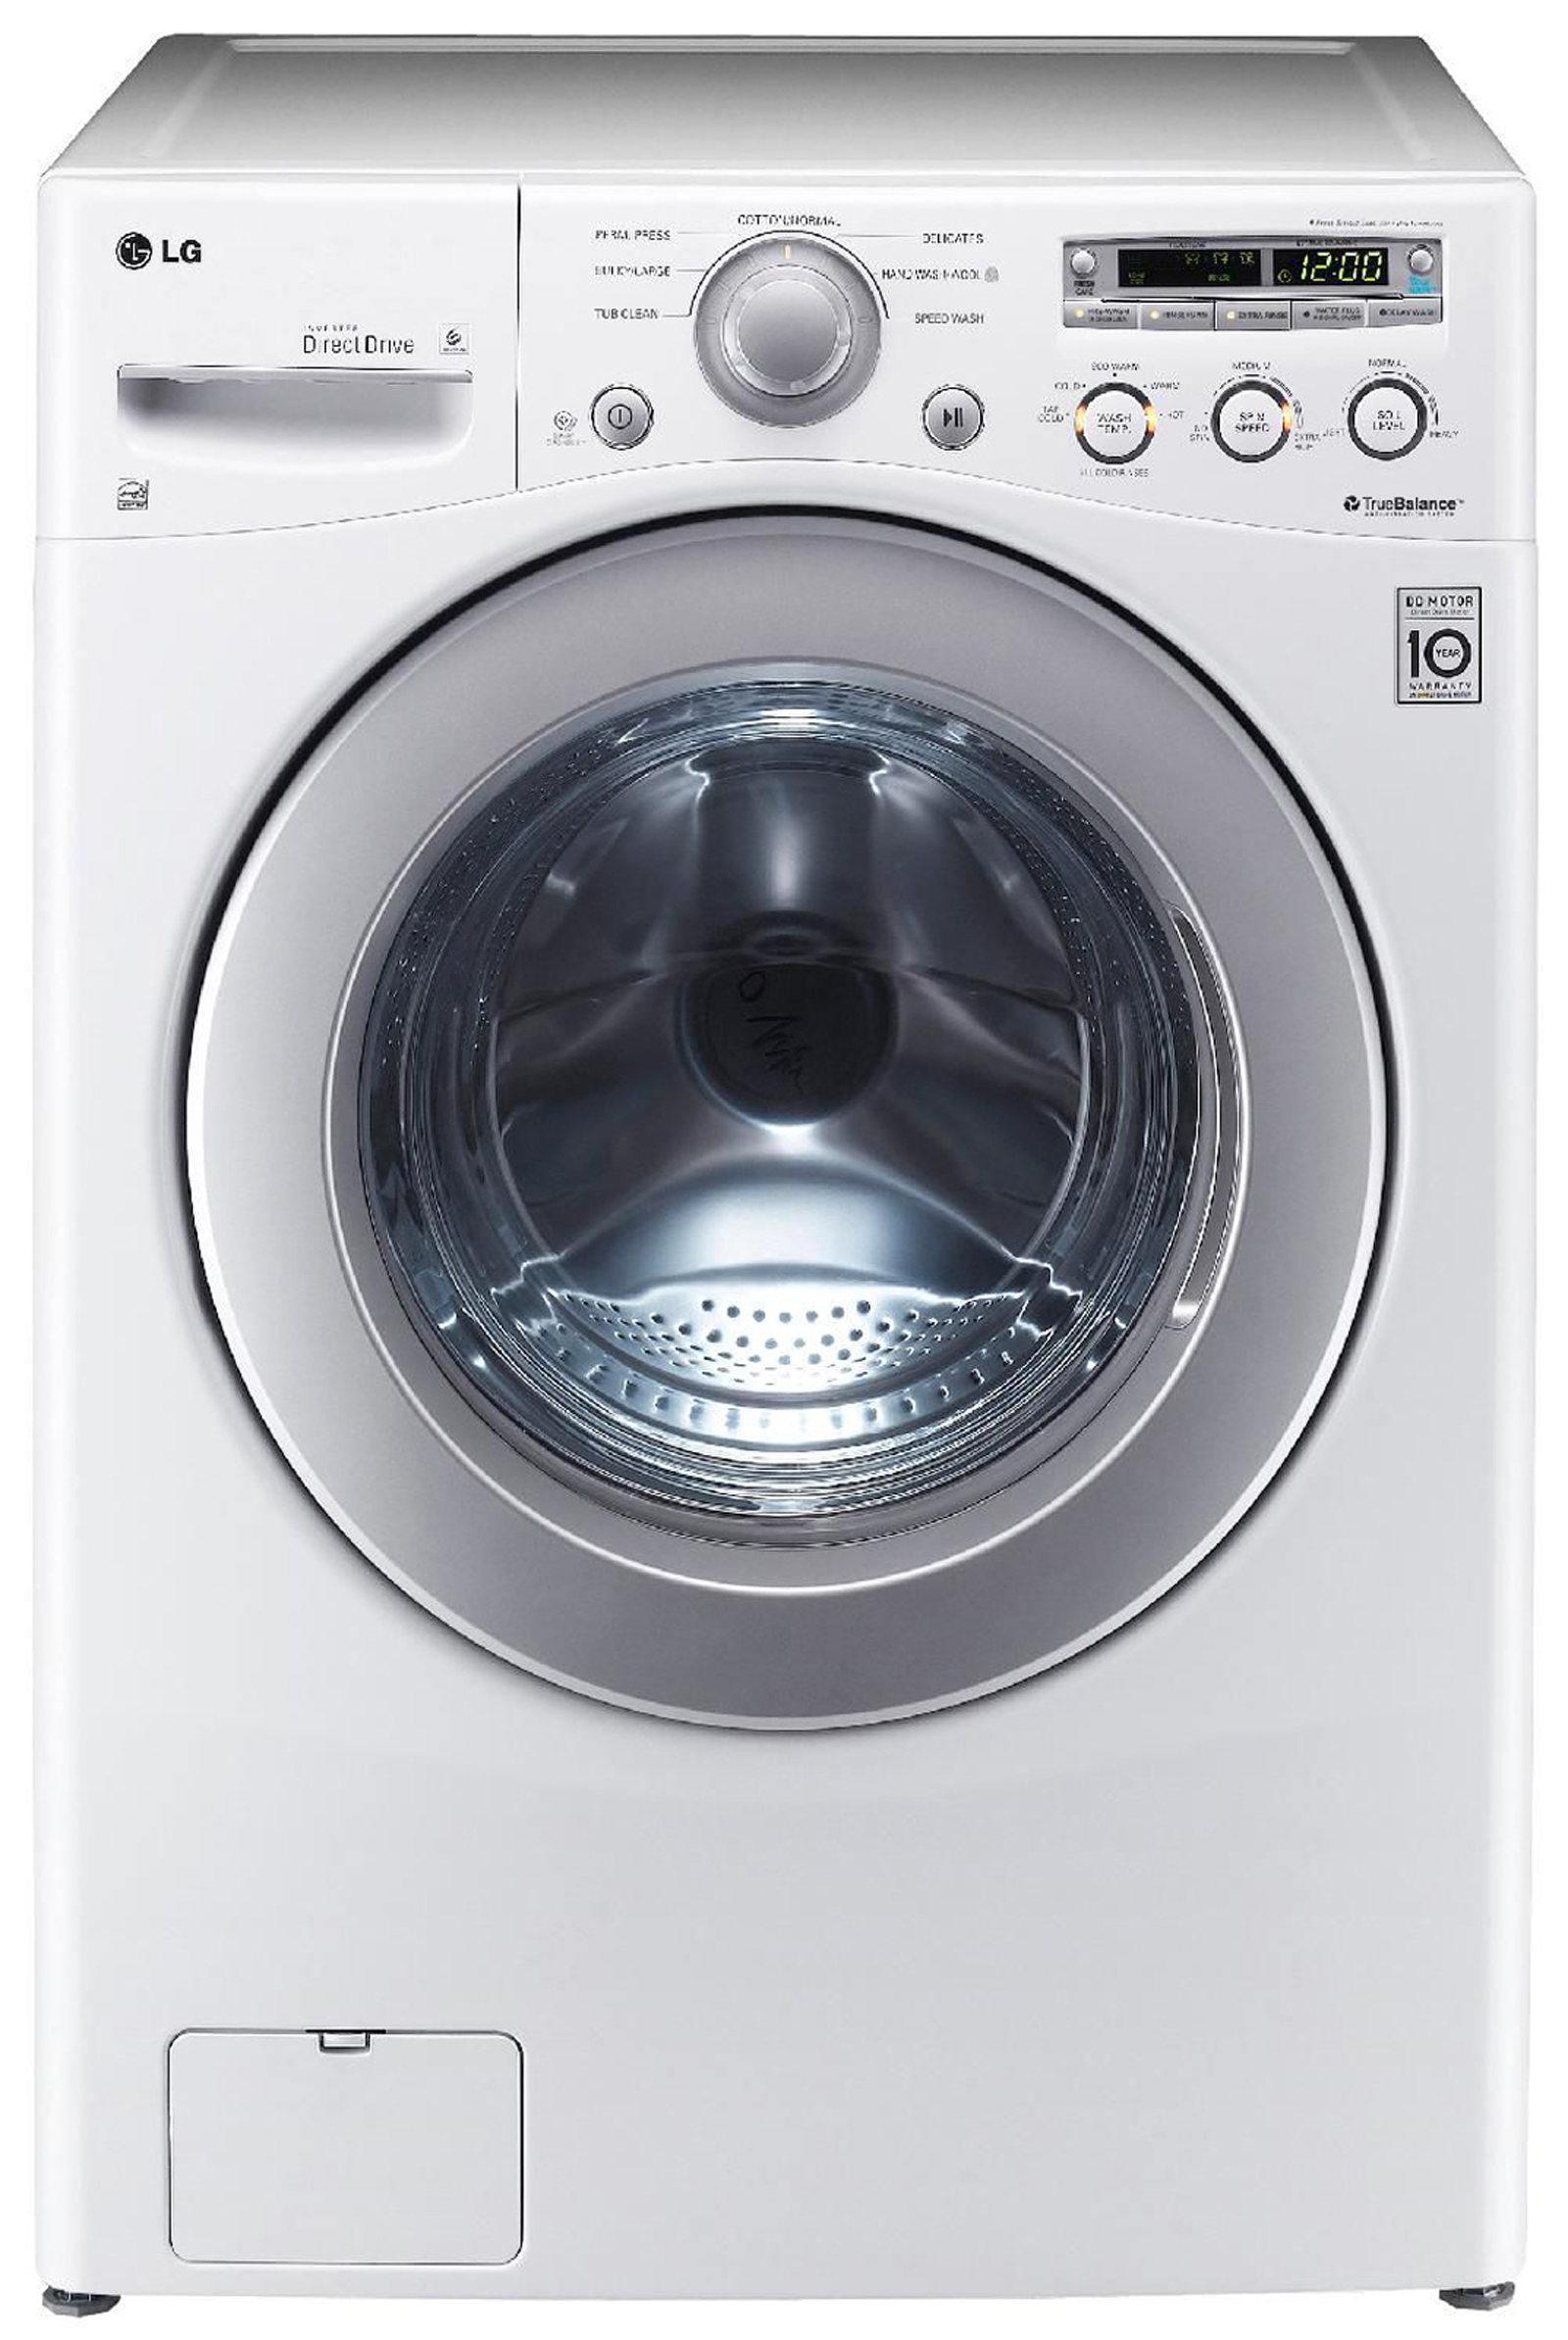 LG Front Load Washer 3.6 cu. ft. WM2250CW Sears